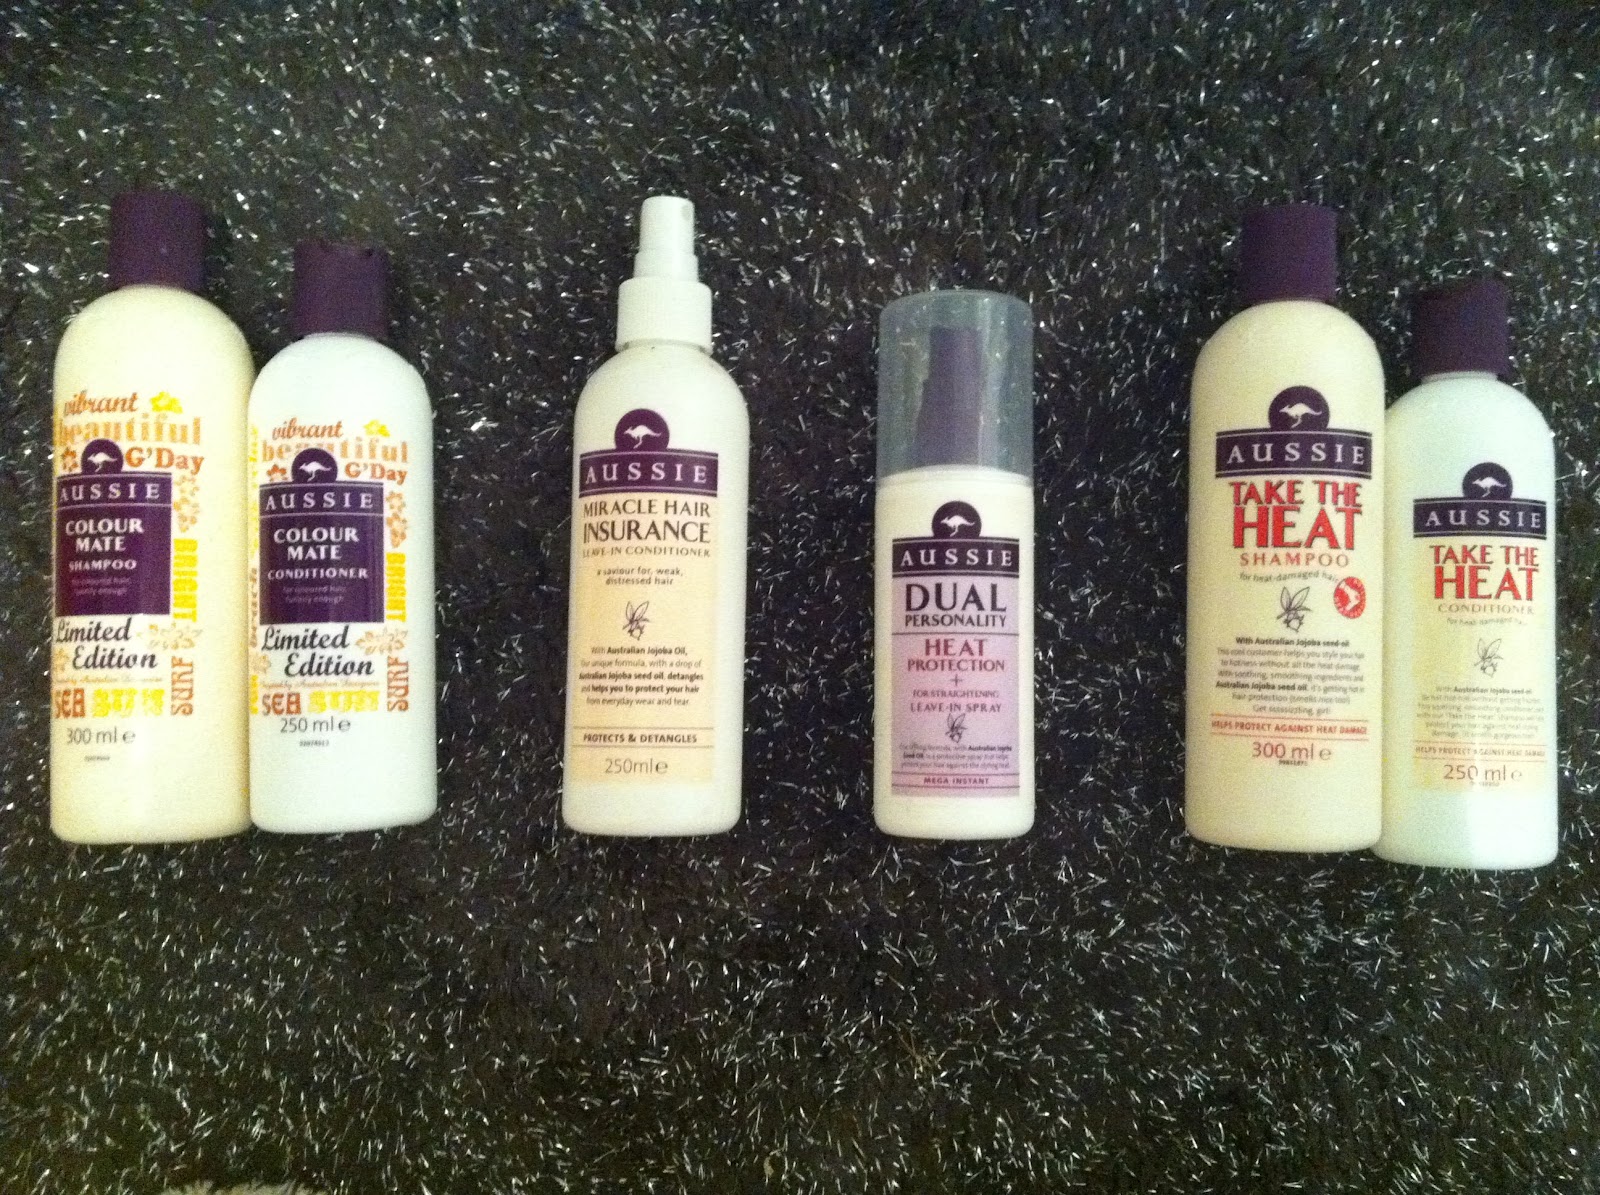 Secrets Of A Shopaholic Aussie Hair Products Review